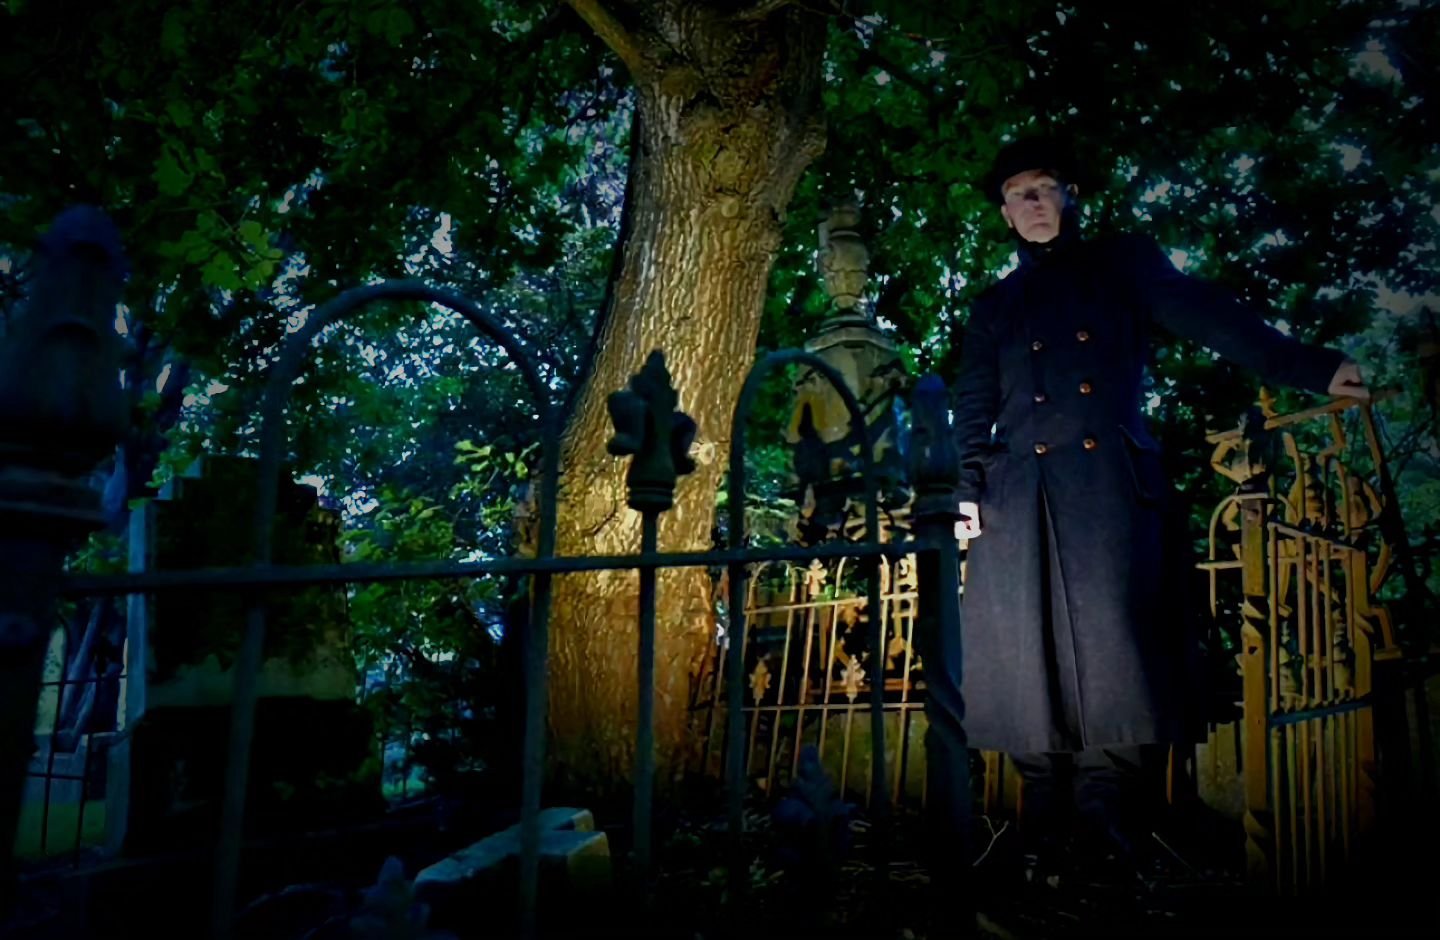 Have you ever wondered about the significance of wrought iron fences &amp; gates in Victorian-era cemeteries? Wrought iron was said to protect the living from the spirit of the deceased. People believed that the ghosts of their dead loved ones could 